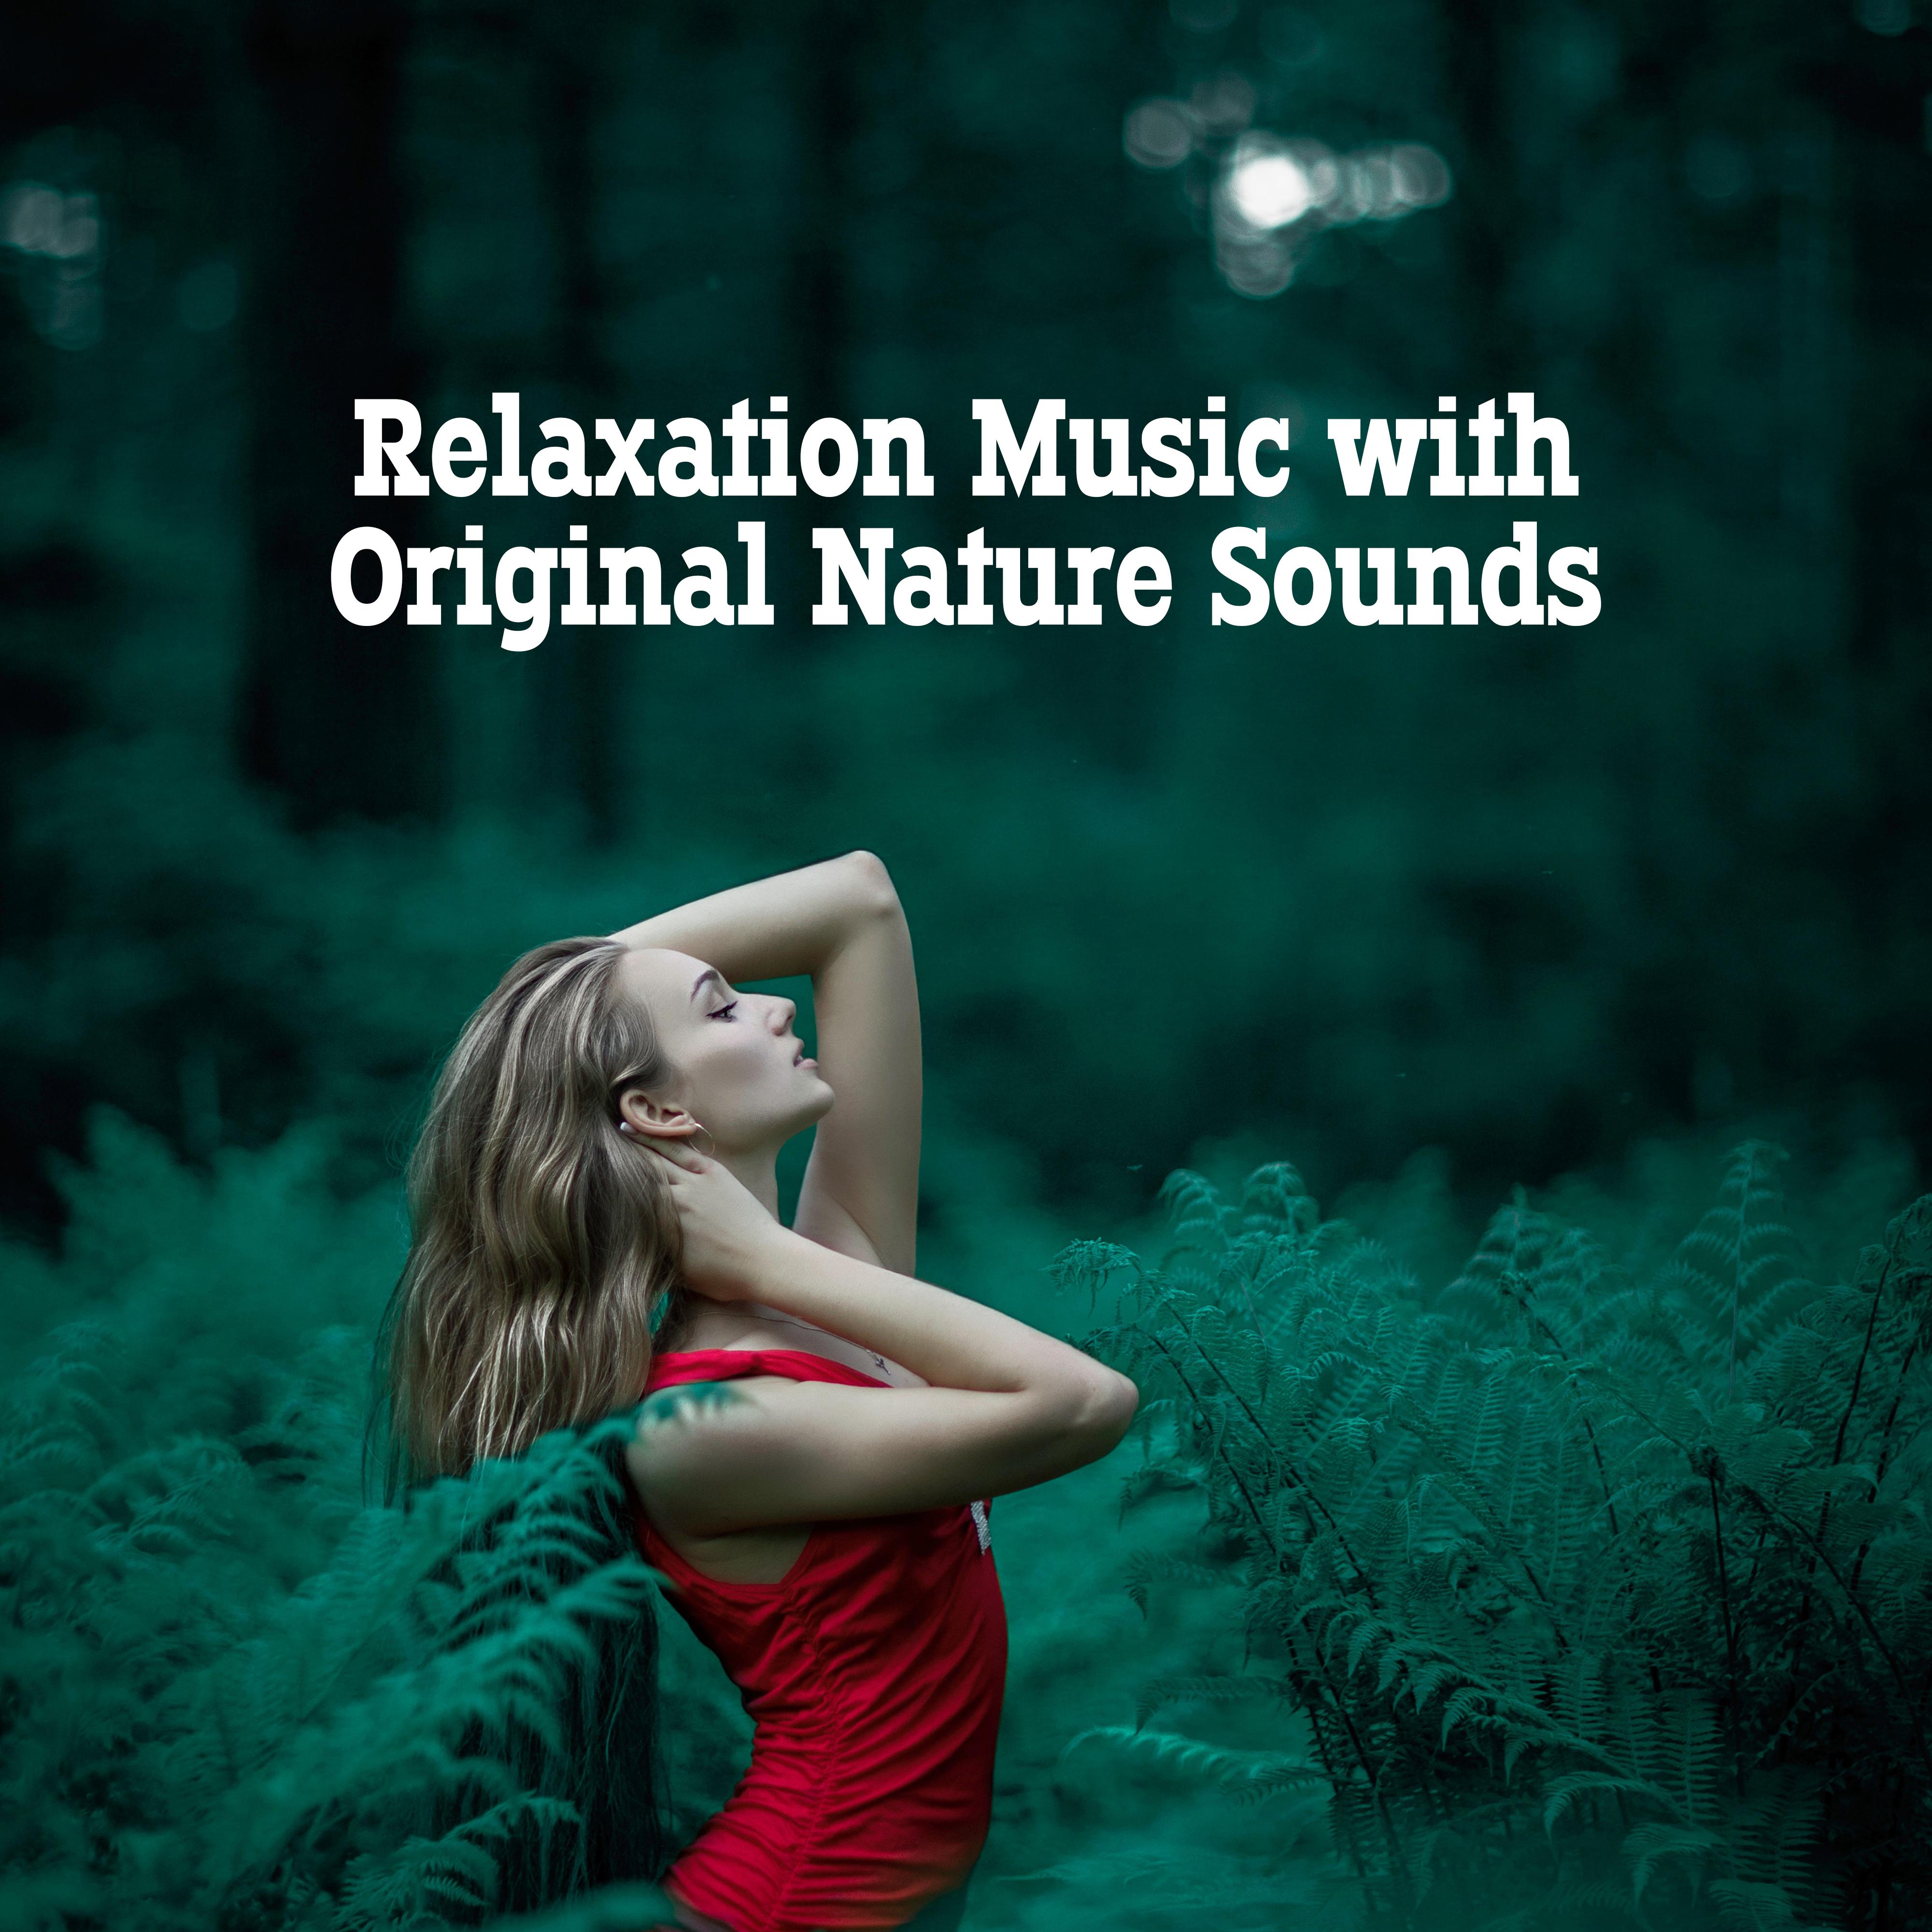 Relaxation Music with Original Nature Sounds